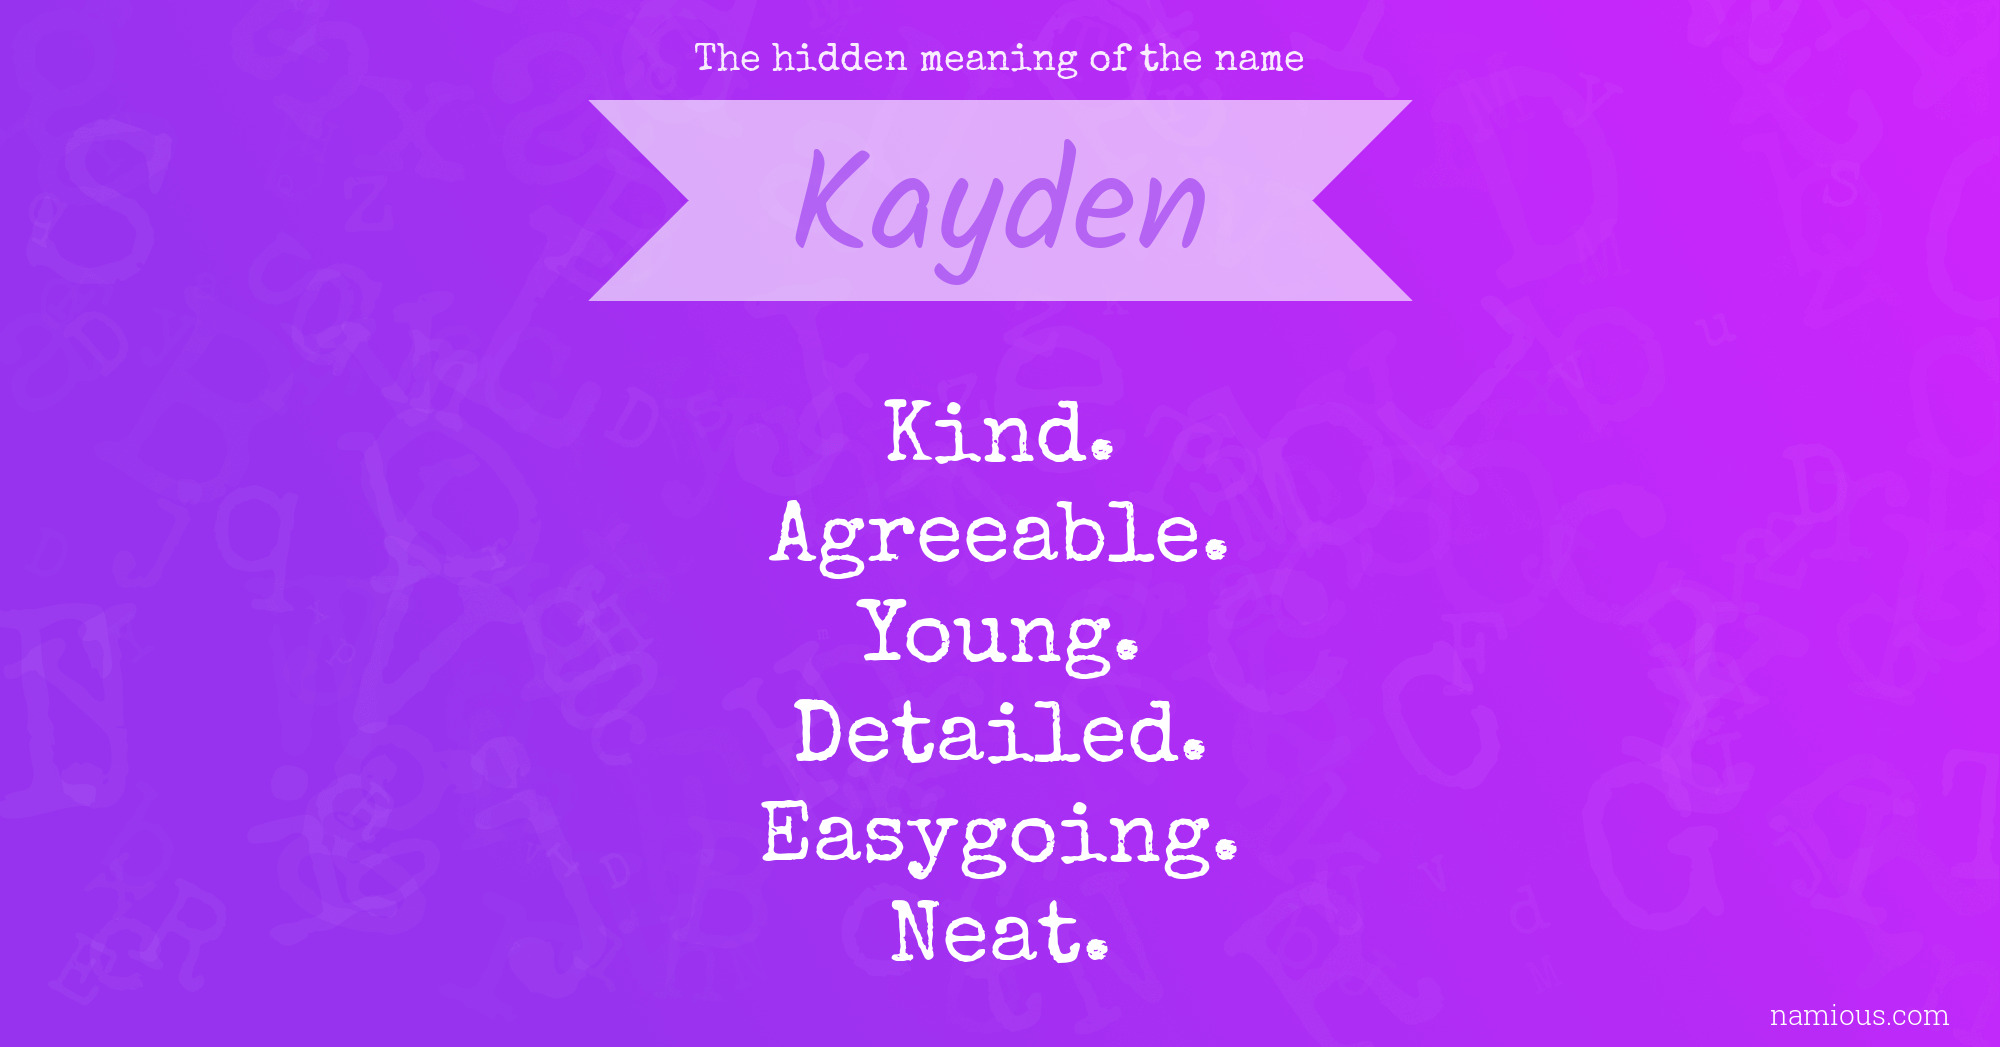 The hidden meaning of the name Kayden